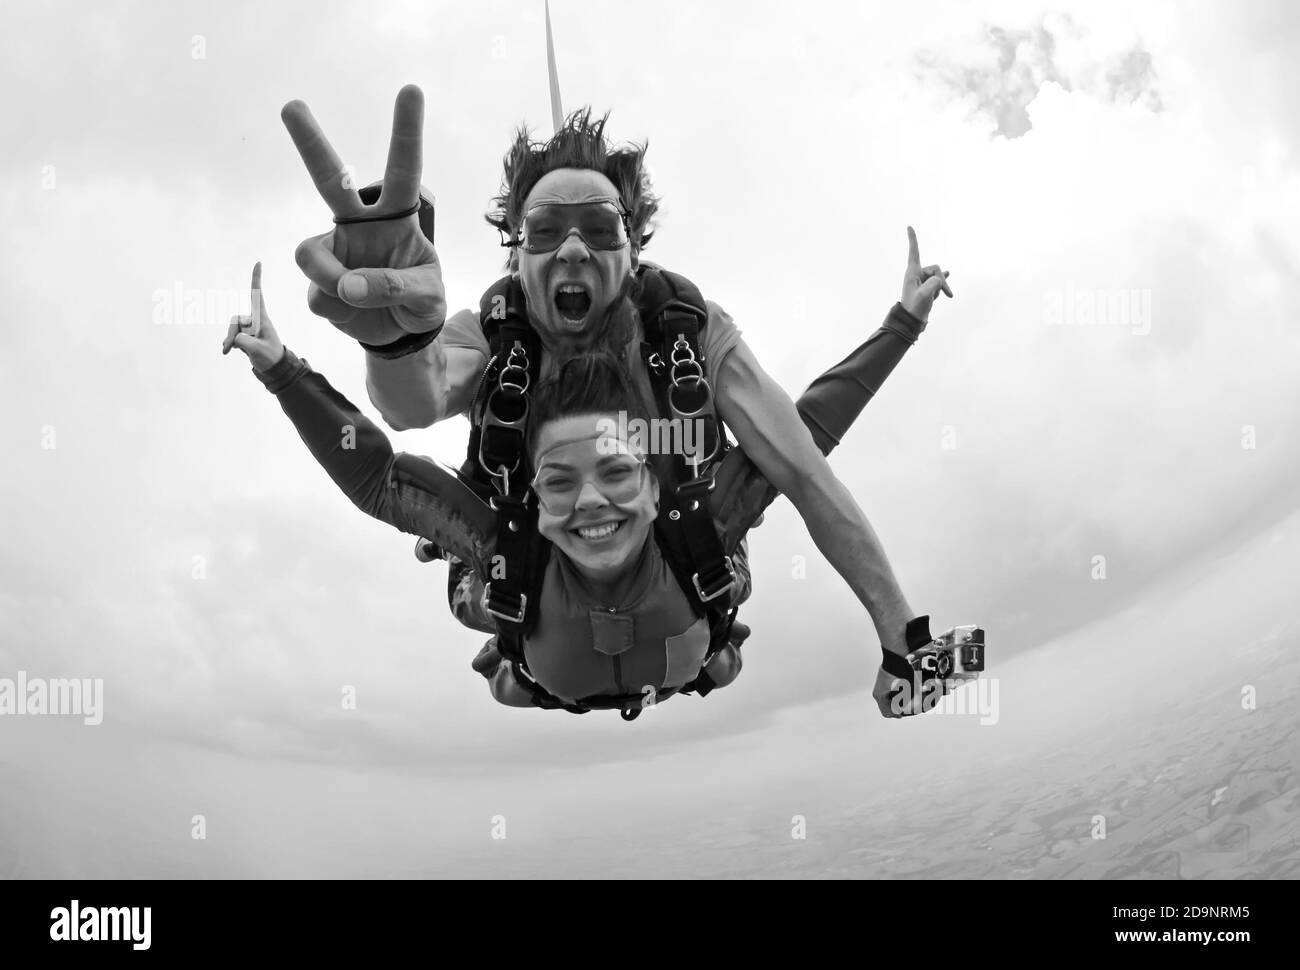 Skydive tandem jump extreme sports black and white Stock Photo